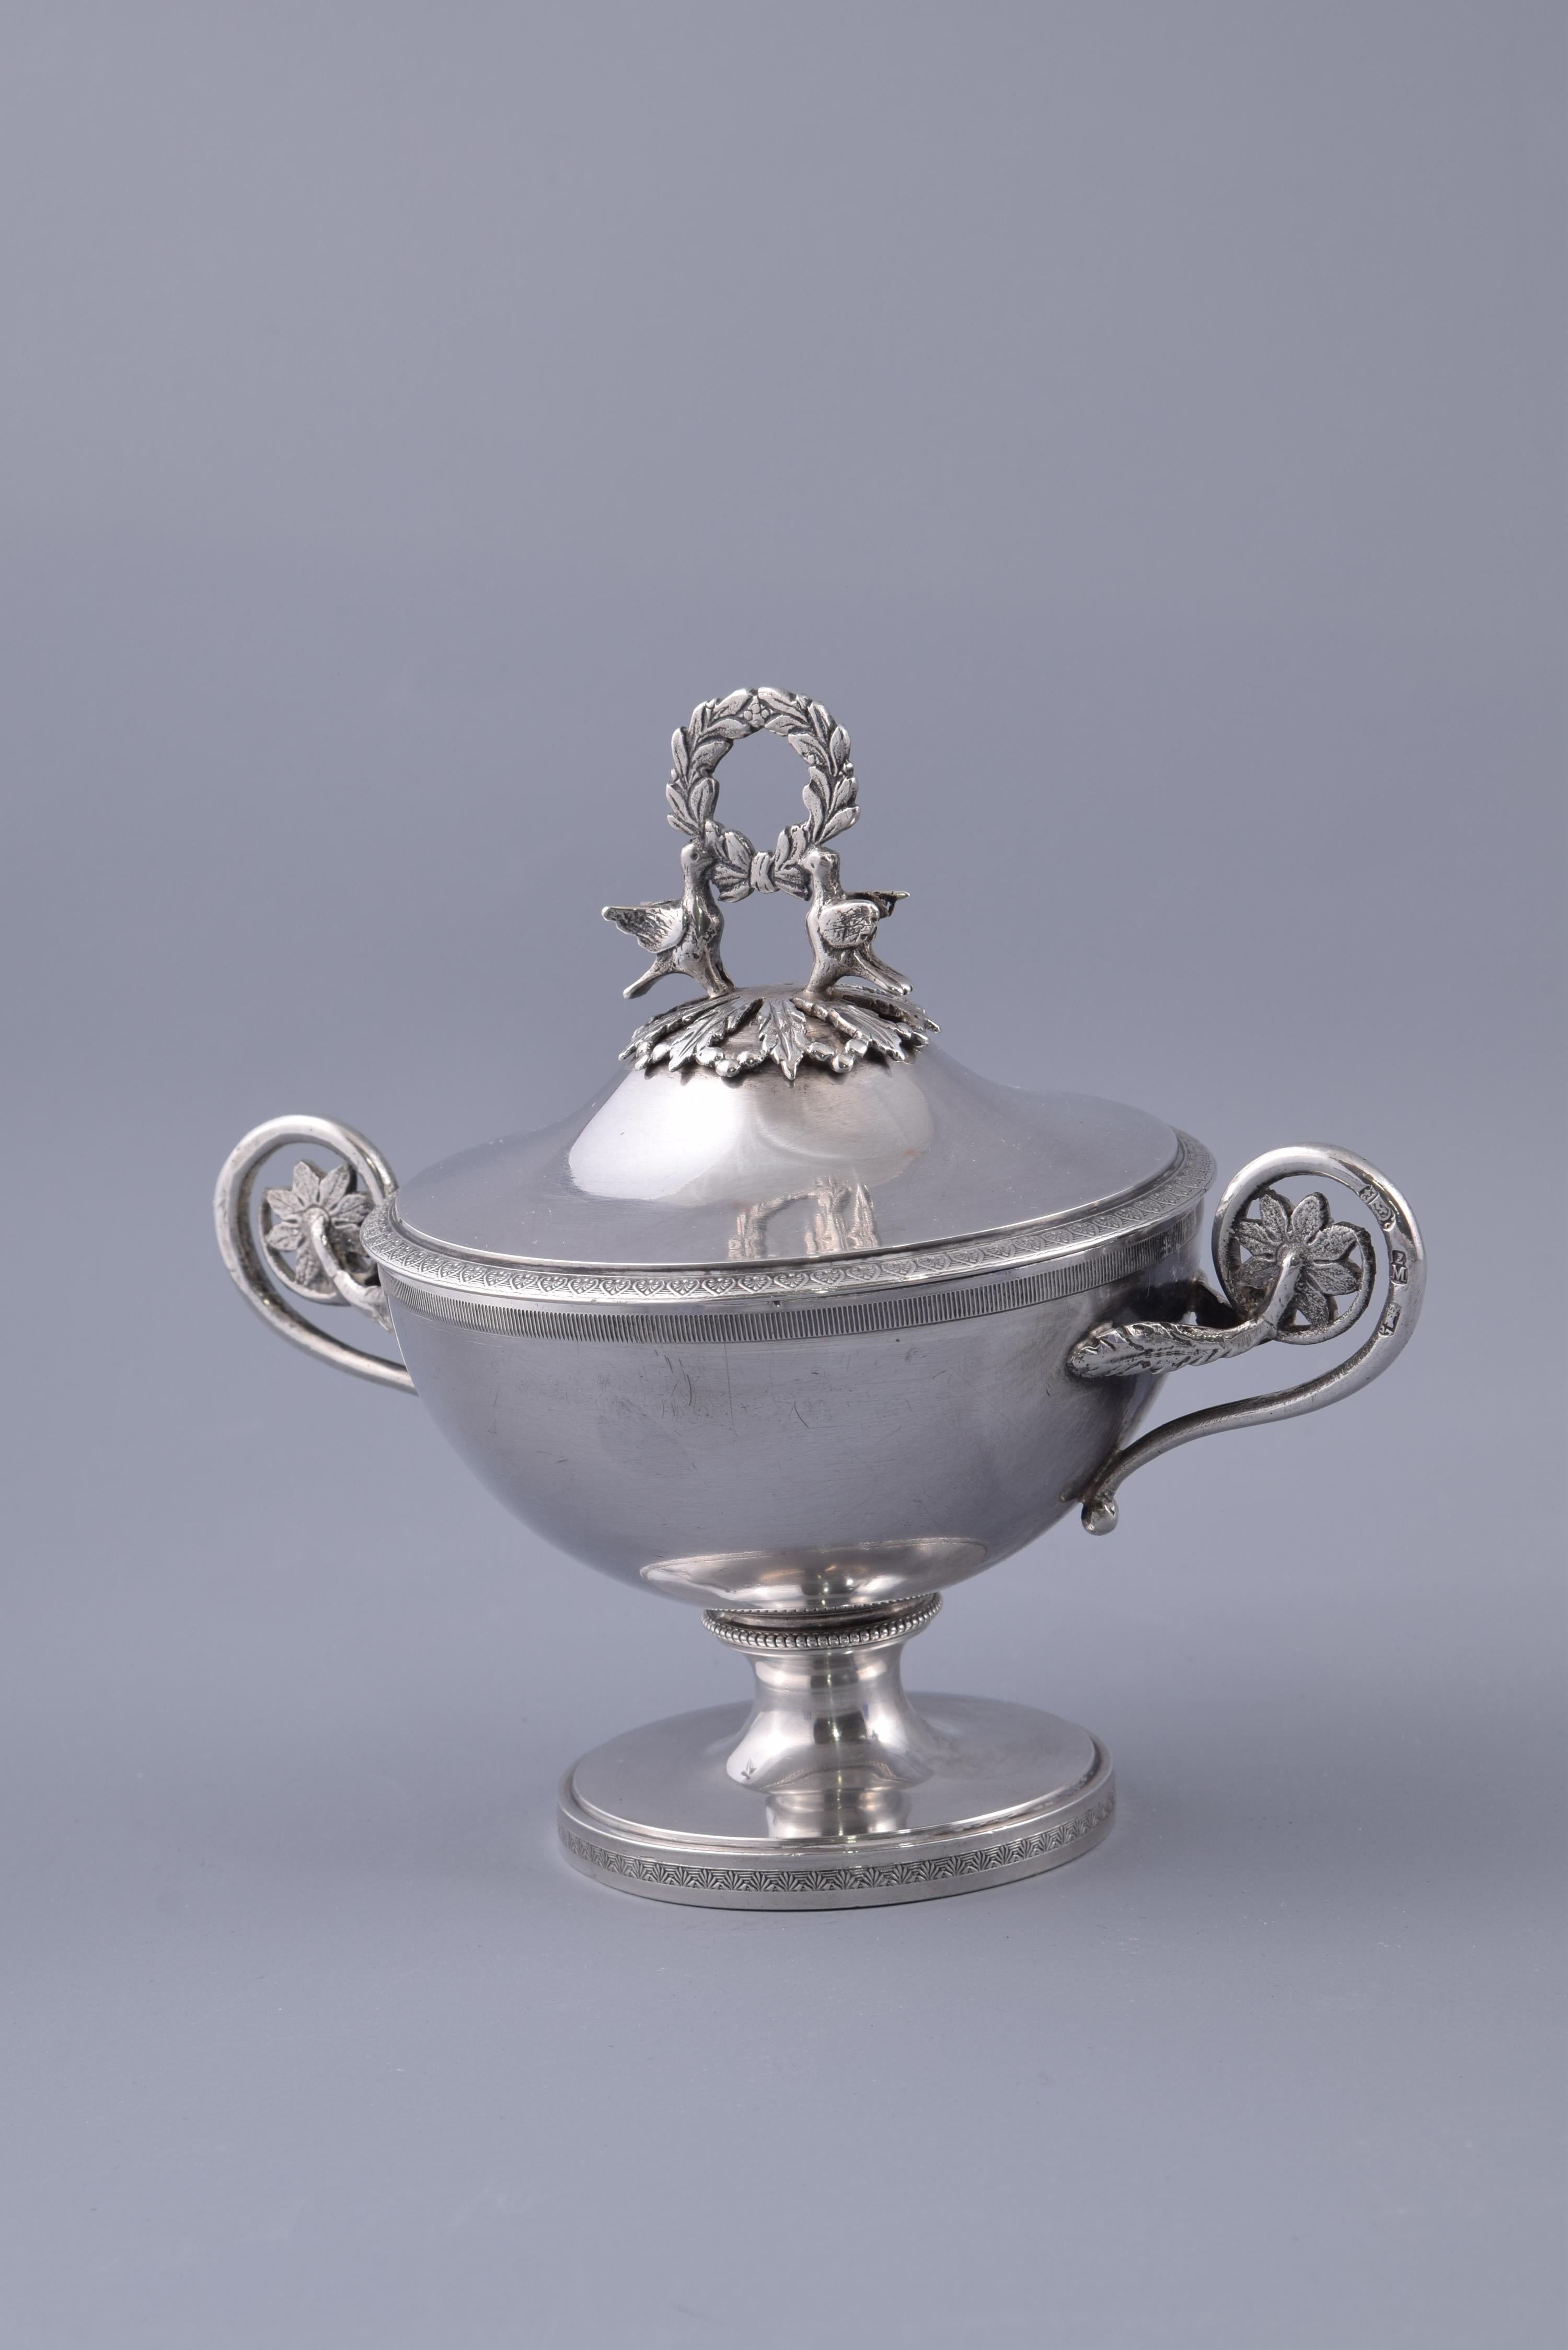 Sauce boat or spice rack with lid. Silver in its color. Silversmiths Martínez, Madrid, towards the end of the 18th century.
With hallmarks.
 Cup-shaped sauce boat with lid made of silver in its color that has a strong influence of the French